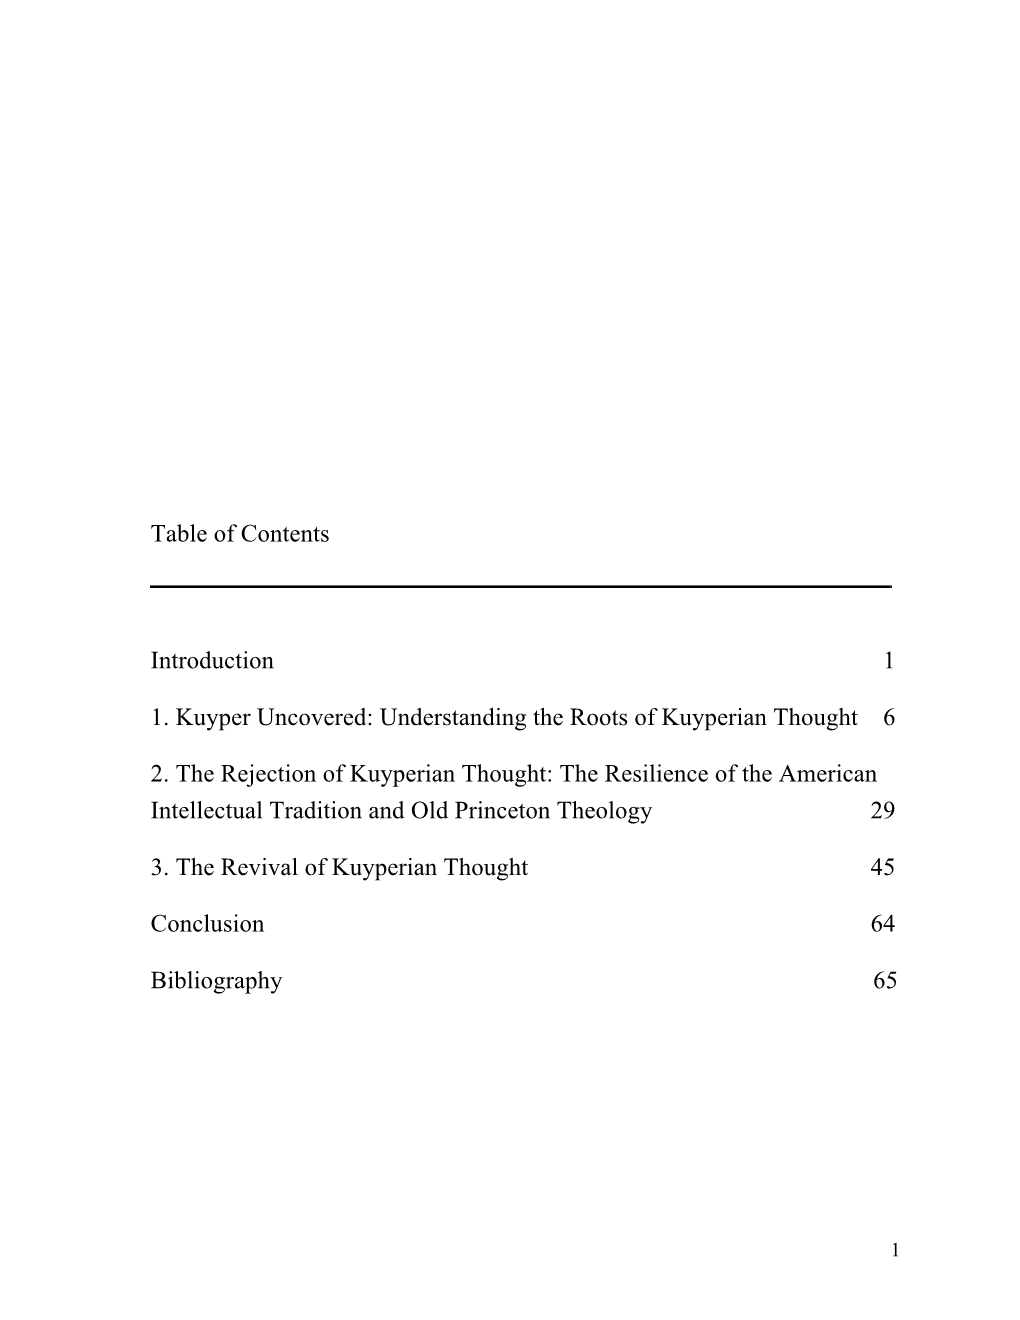 Table of Contents Introduction 1 1. Kuyper Uncovered: Understanding the Roots of Kuyperian Thought 6 2. the Rejection of Ku